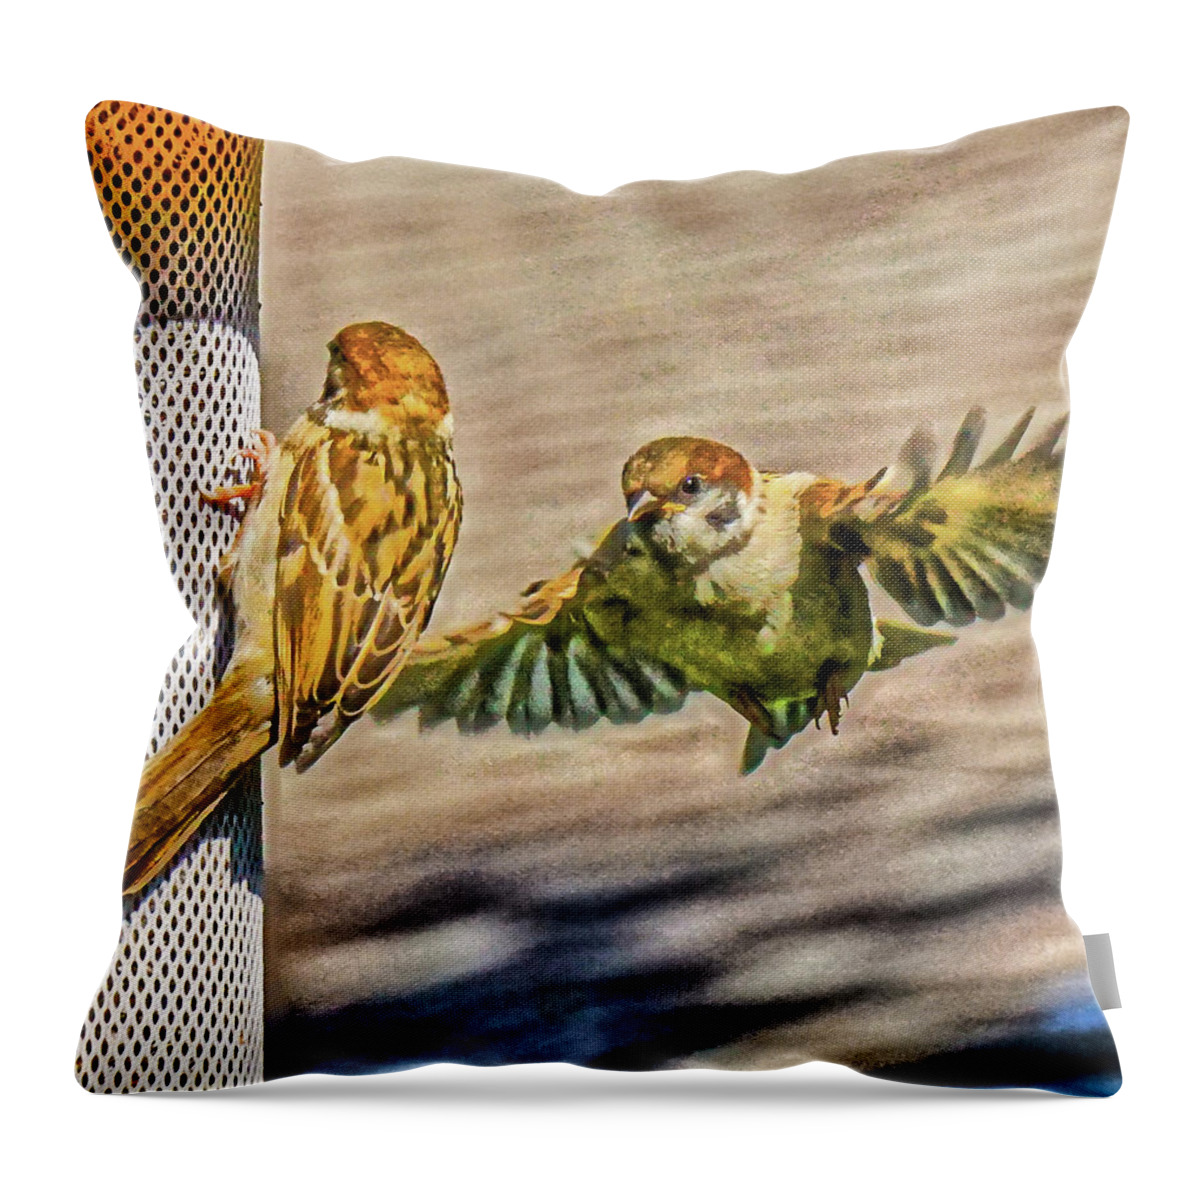 Sparrow Throw Pillow featuring the photograph Sparrows Feeding by Chris White by C H Apperson